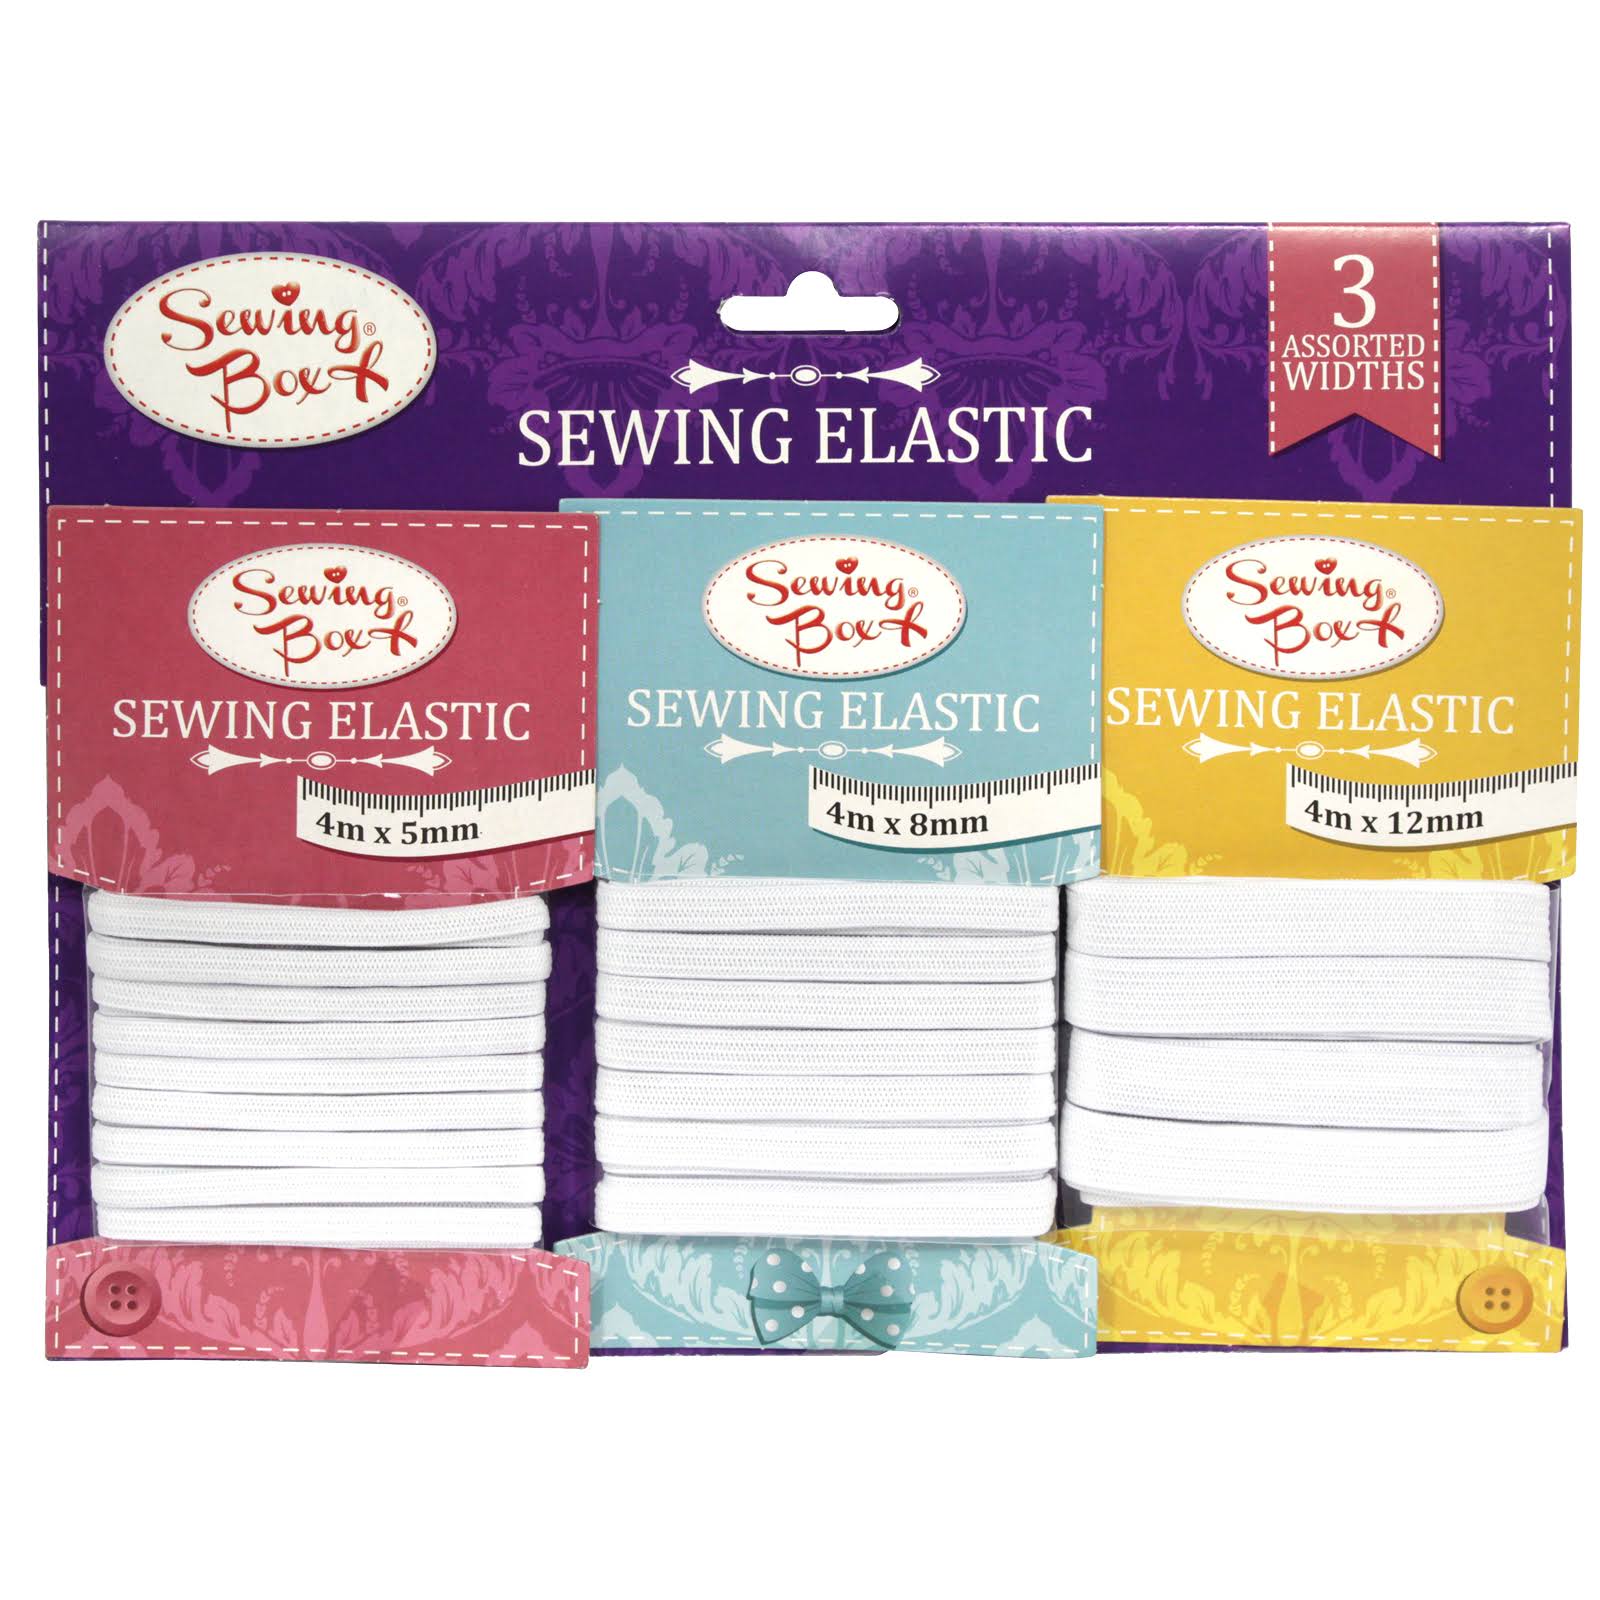 Sewing Box Sewing 3 Assorted Elastic